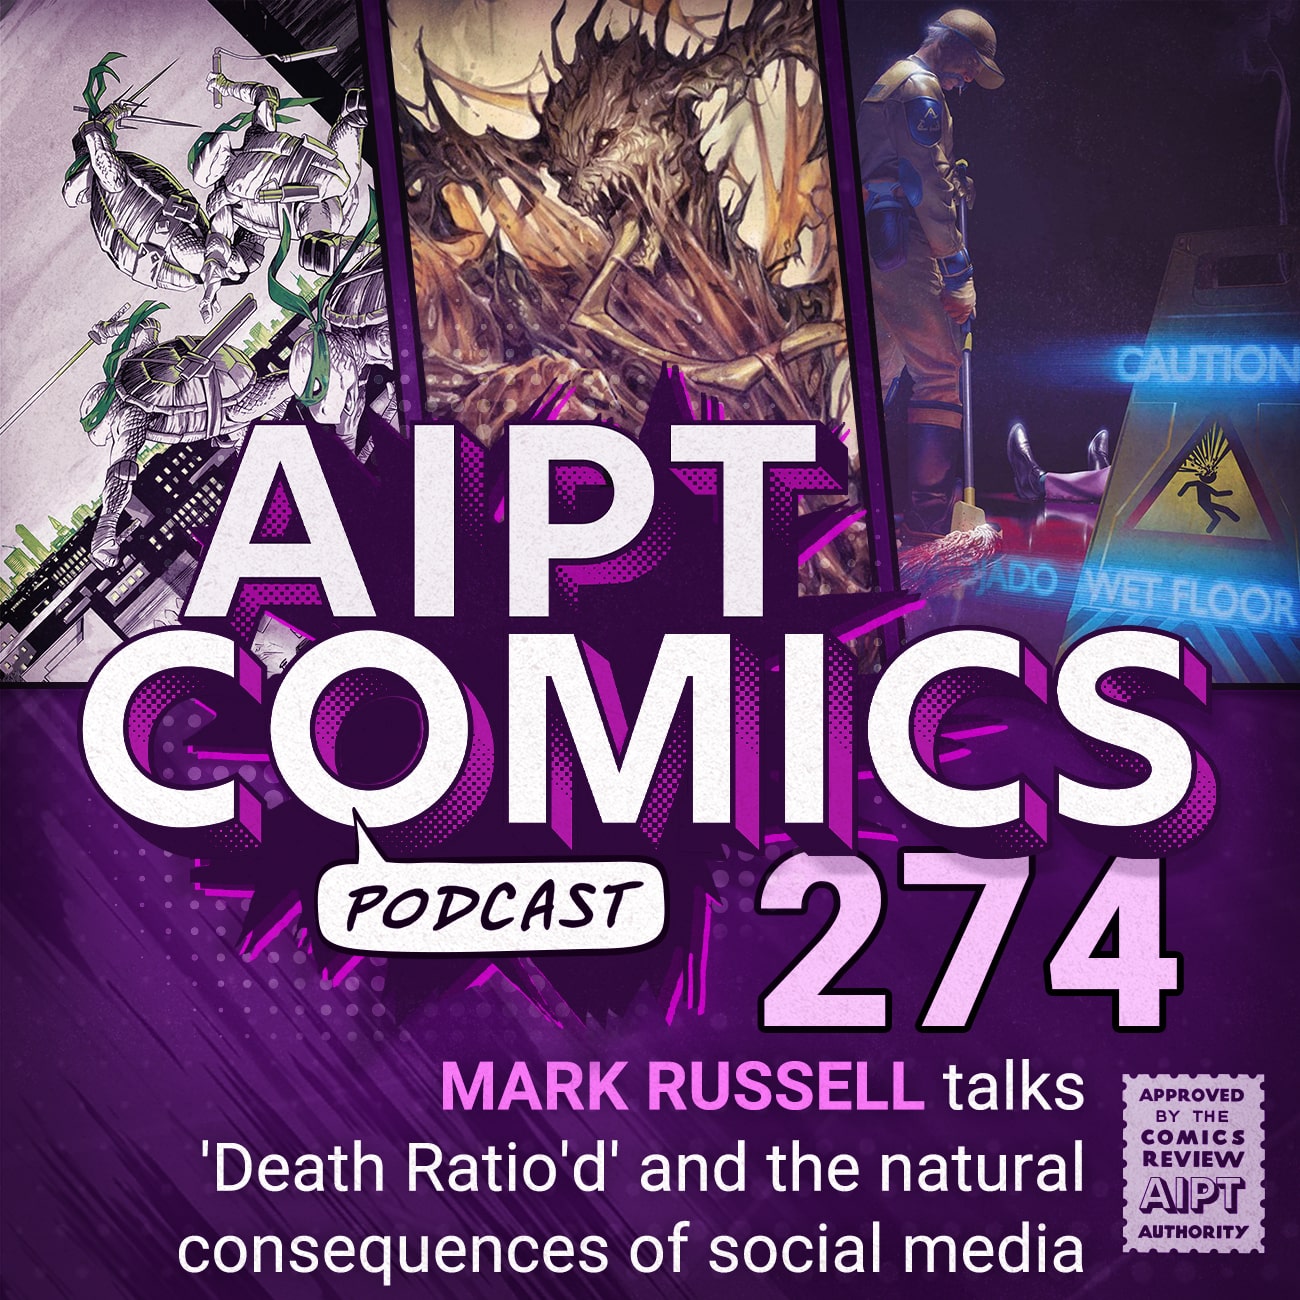 AIPT Comics Podcast Episode 274: Mark Russell talks 'Death Ratio'd' and the natural consequences of social media